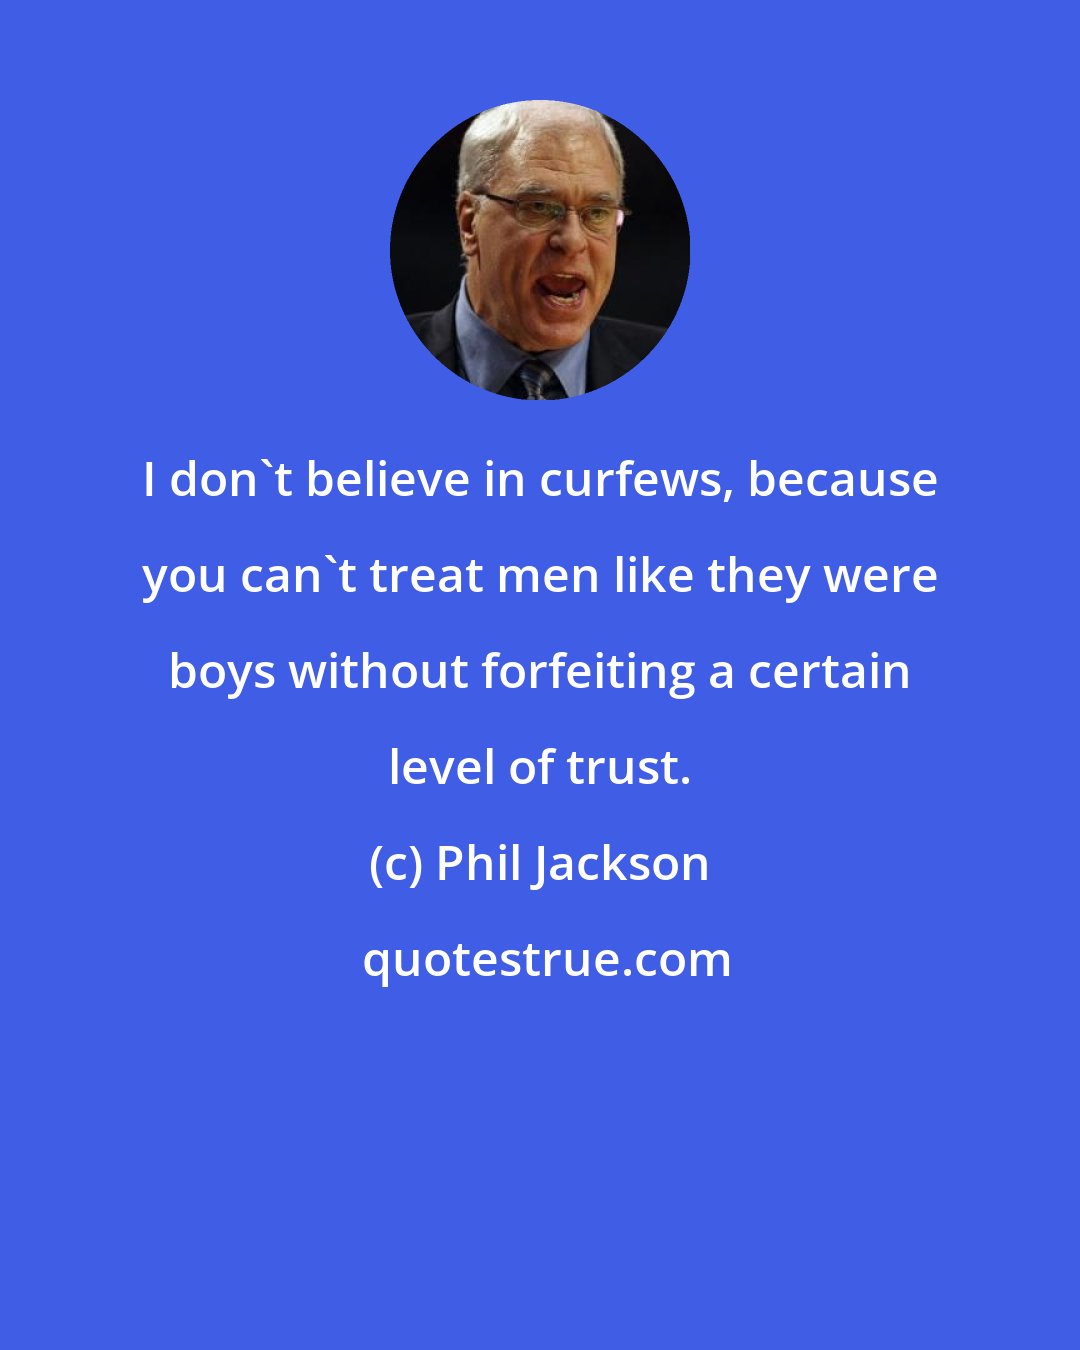 Phil Jackson: I don't believe in curfews, because you can't treat men like they were boys without forfeiting a certain level of trust.